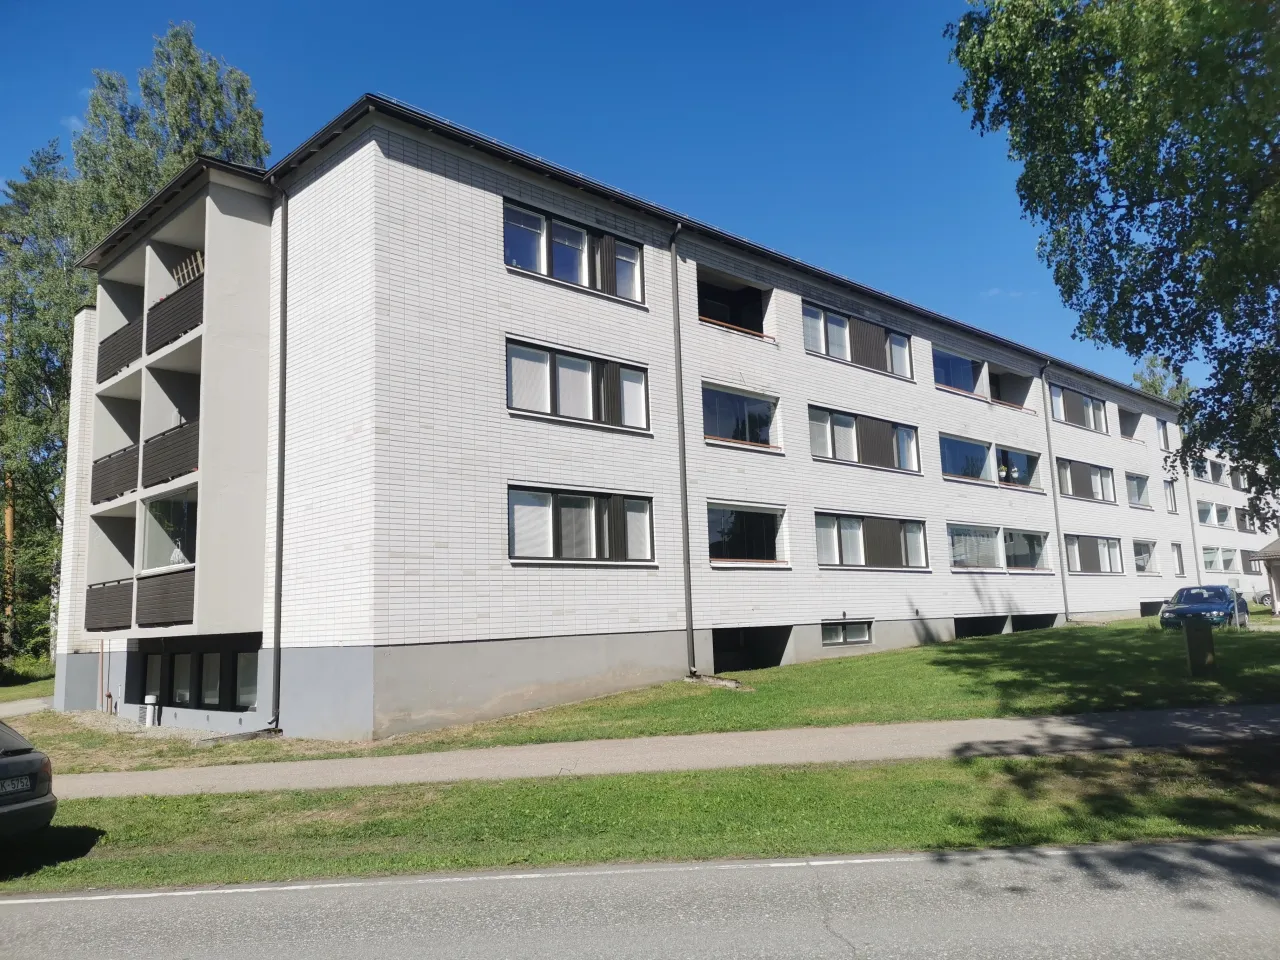 Flat in Taavetti, Finland, 44.5 m² - picture 1